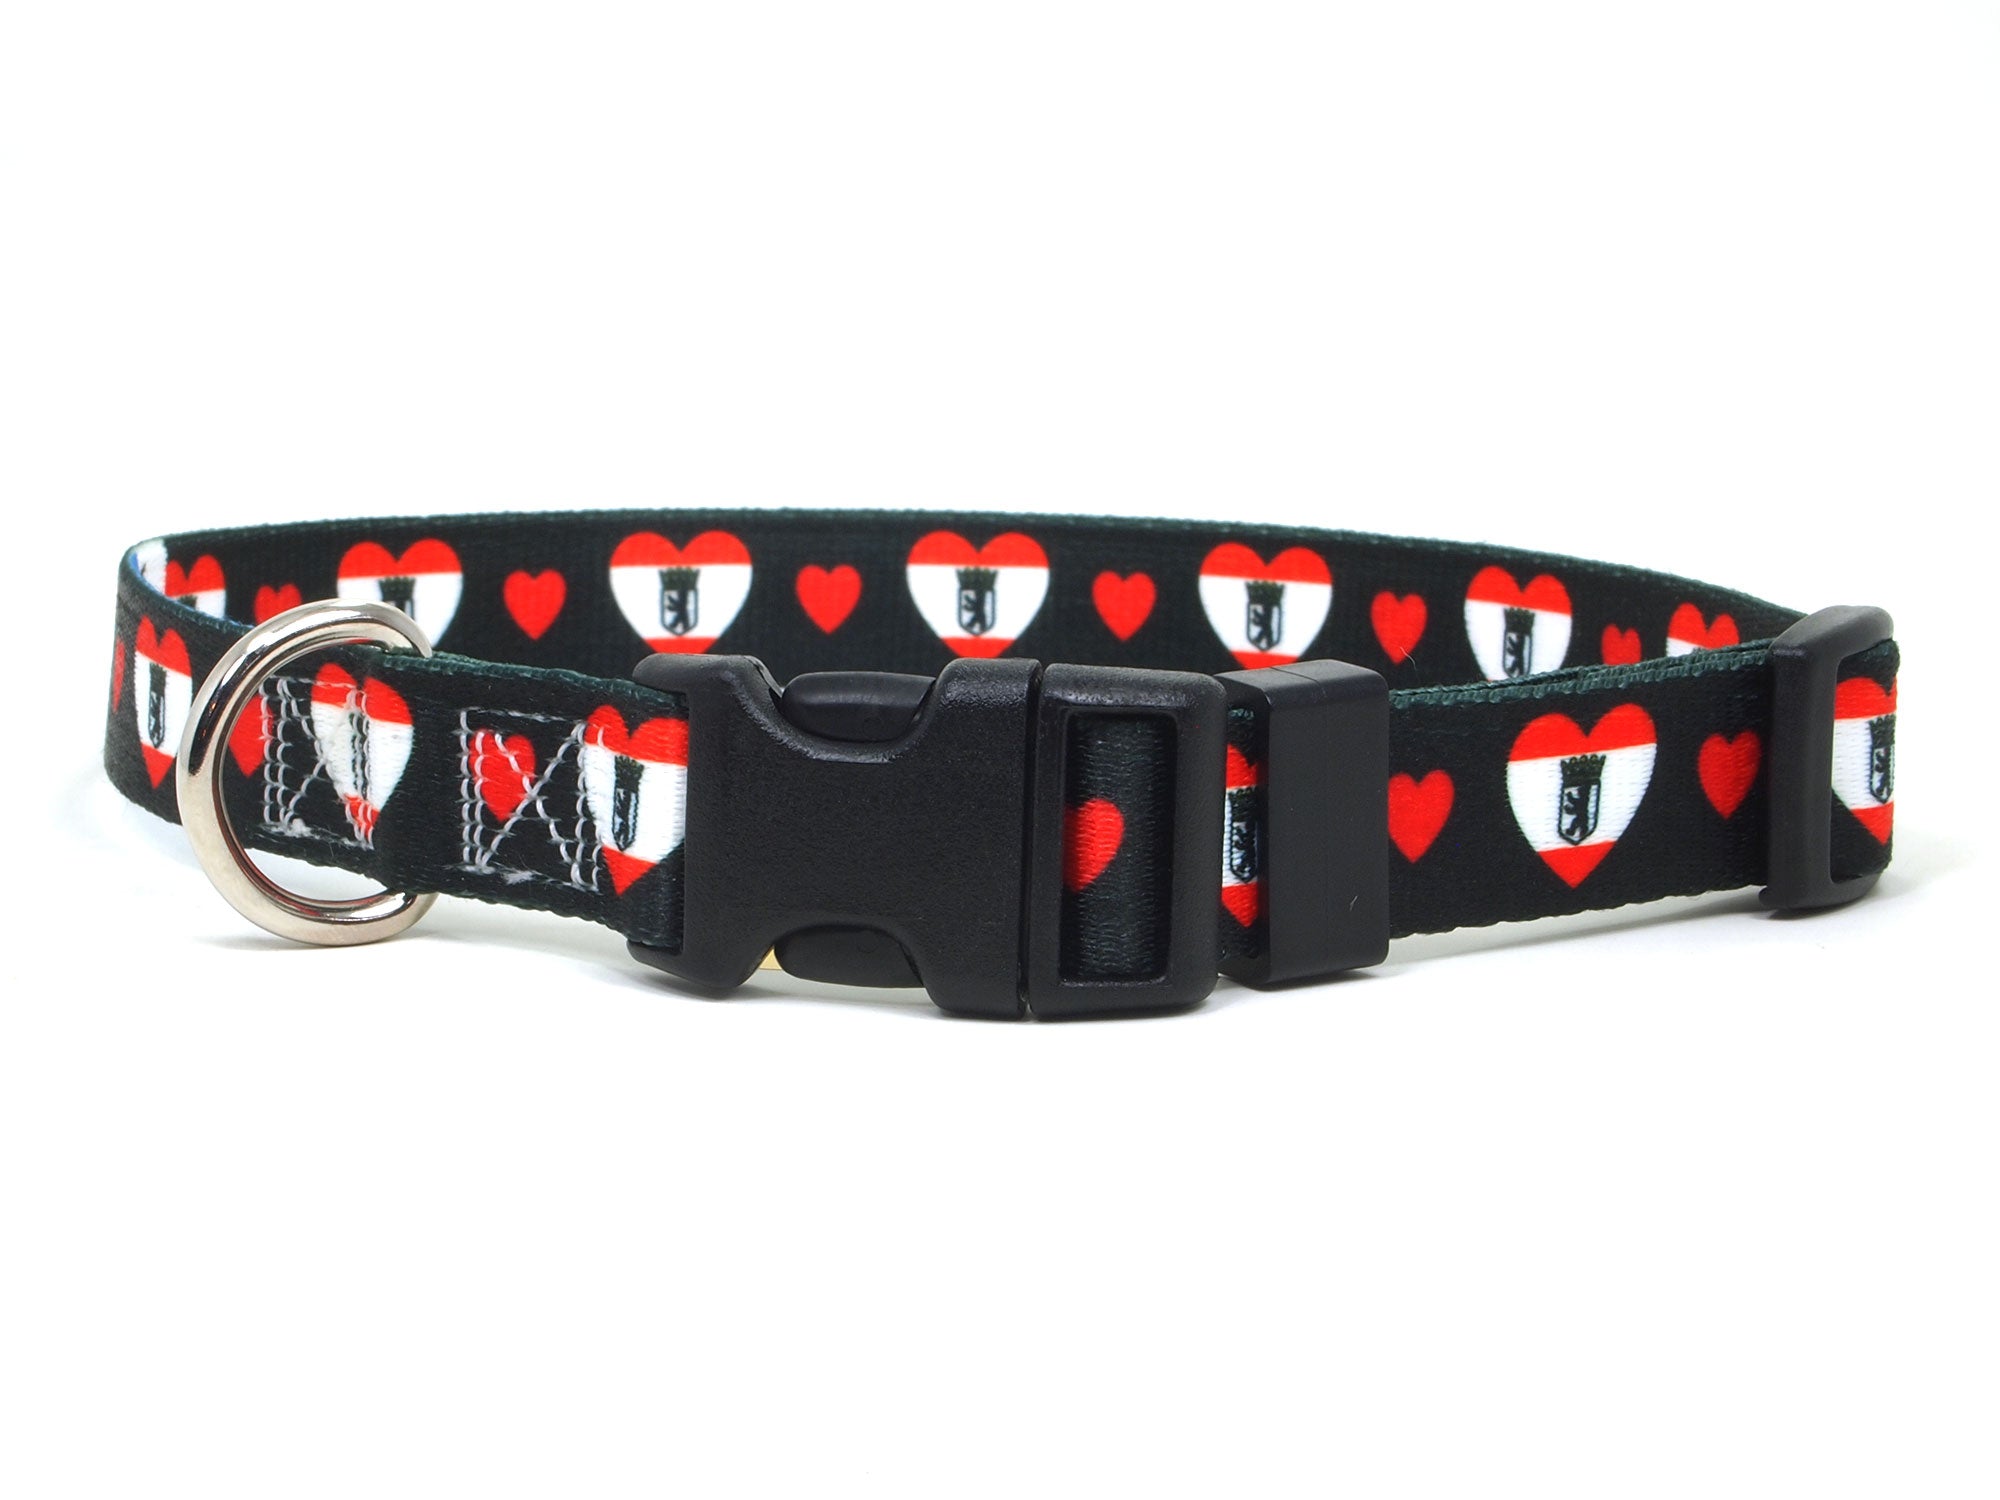 Dog Collar with Berlin Hearts Pattern in black